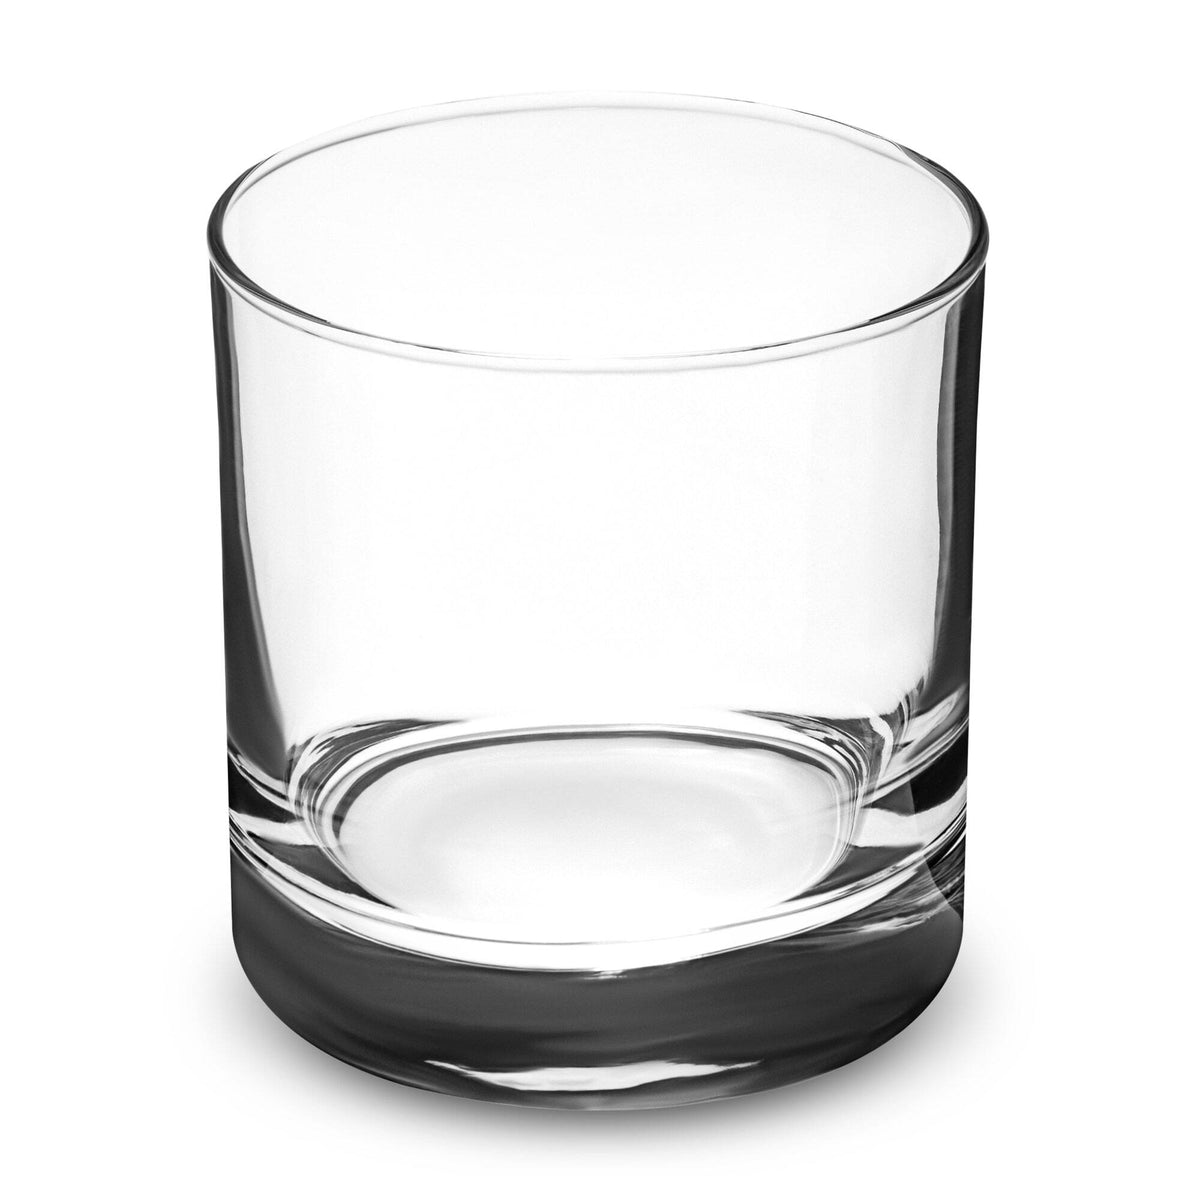 DST35830-Wholesale-Promotional-10Oz-Stainless-Steel-Whiskey-Glass-With-Custom-Imprint